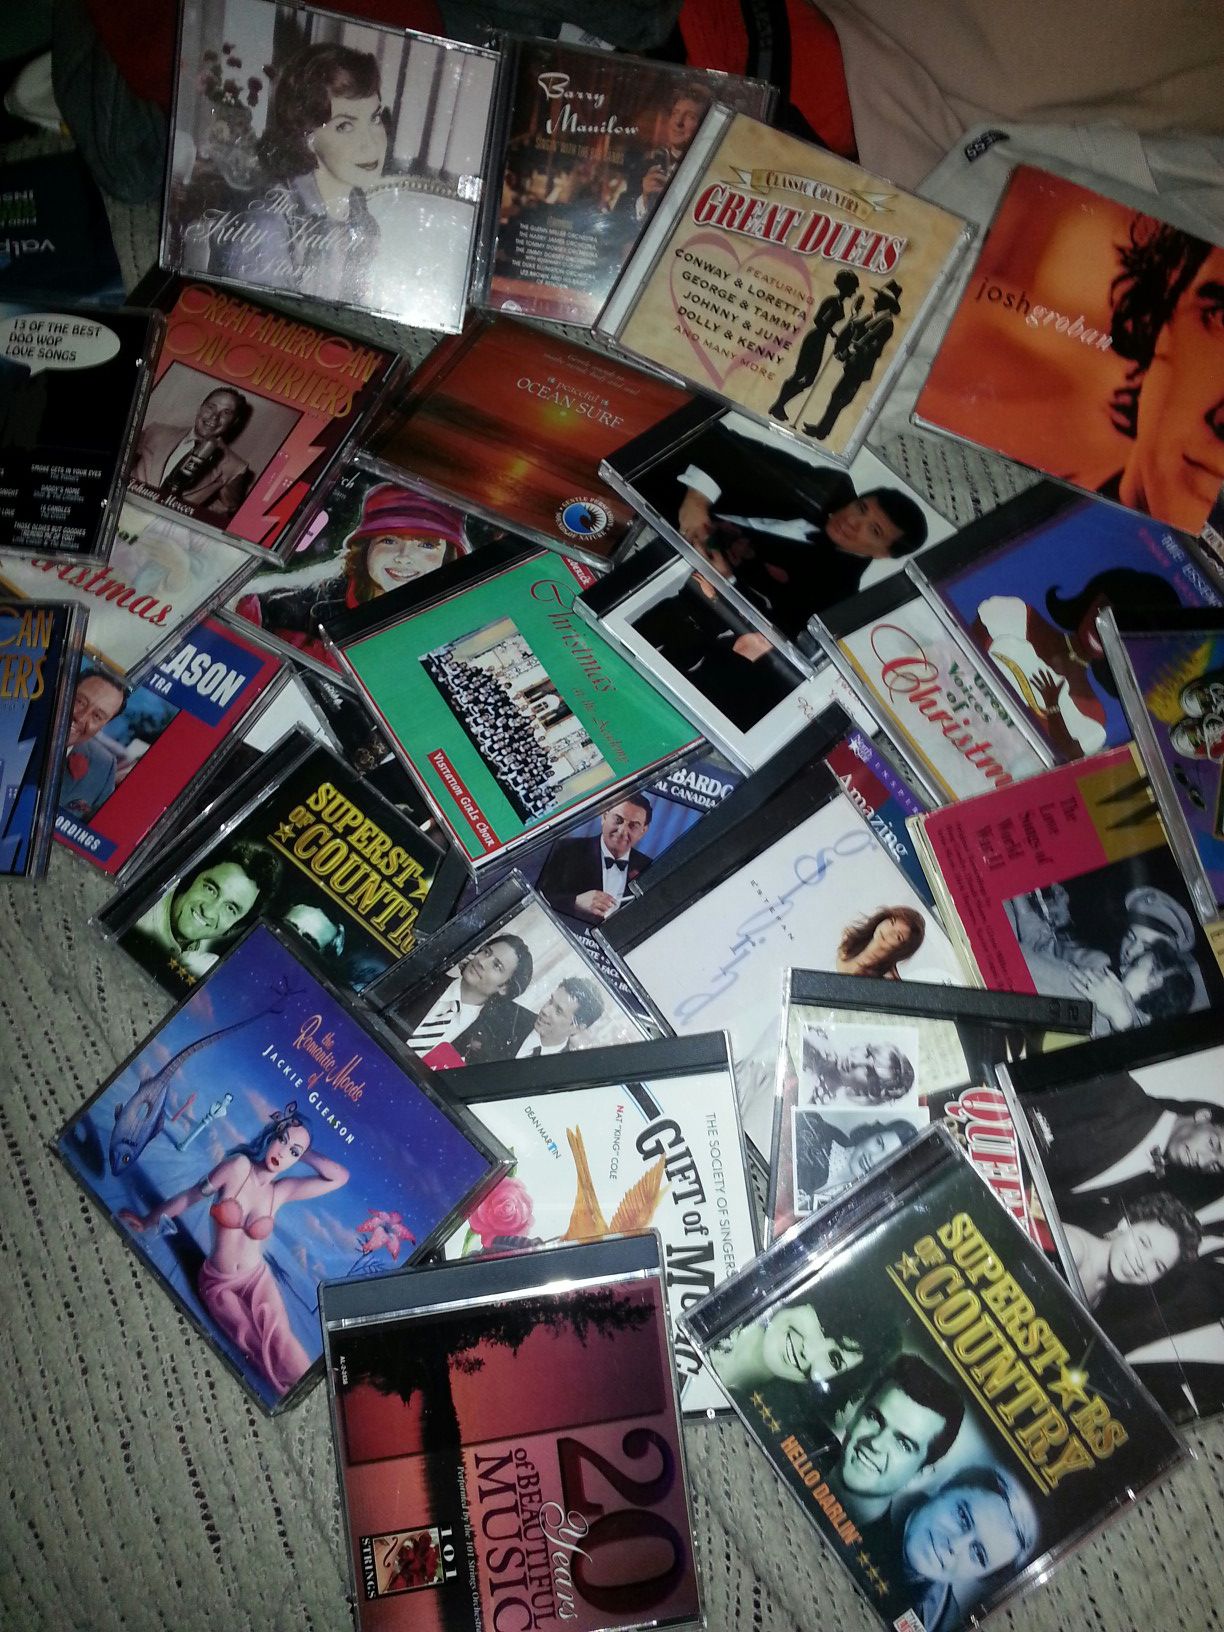 CDs over 100 Different music oldie country soul rock.3$ each